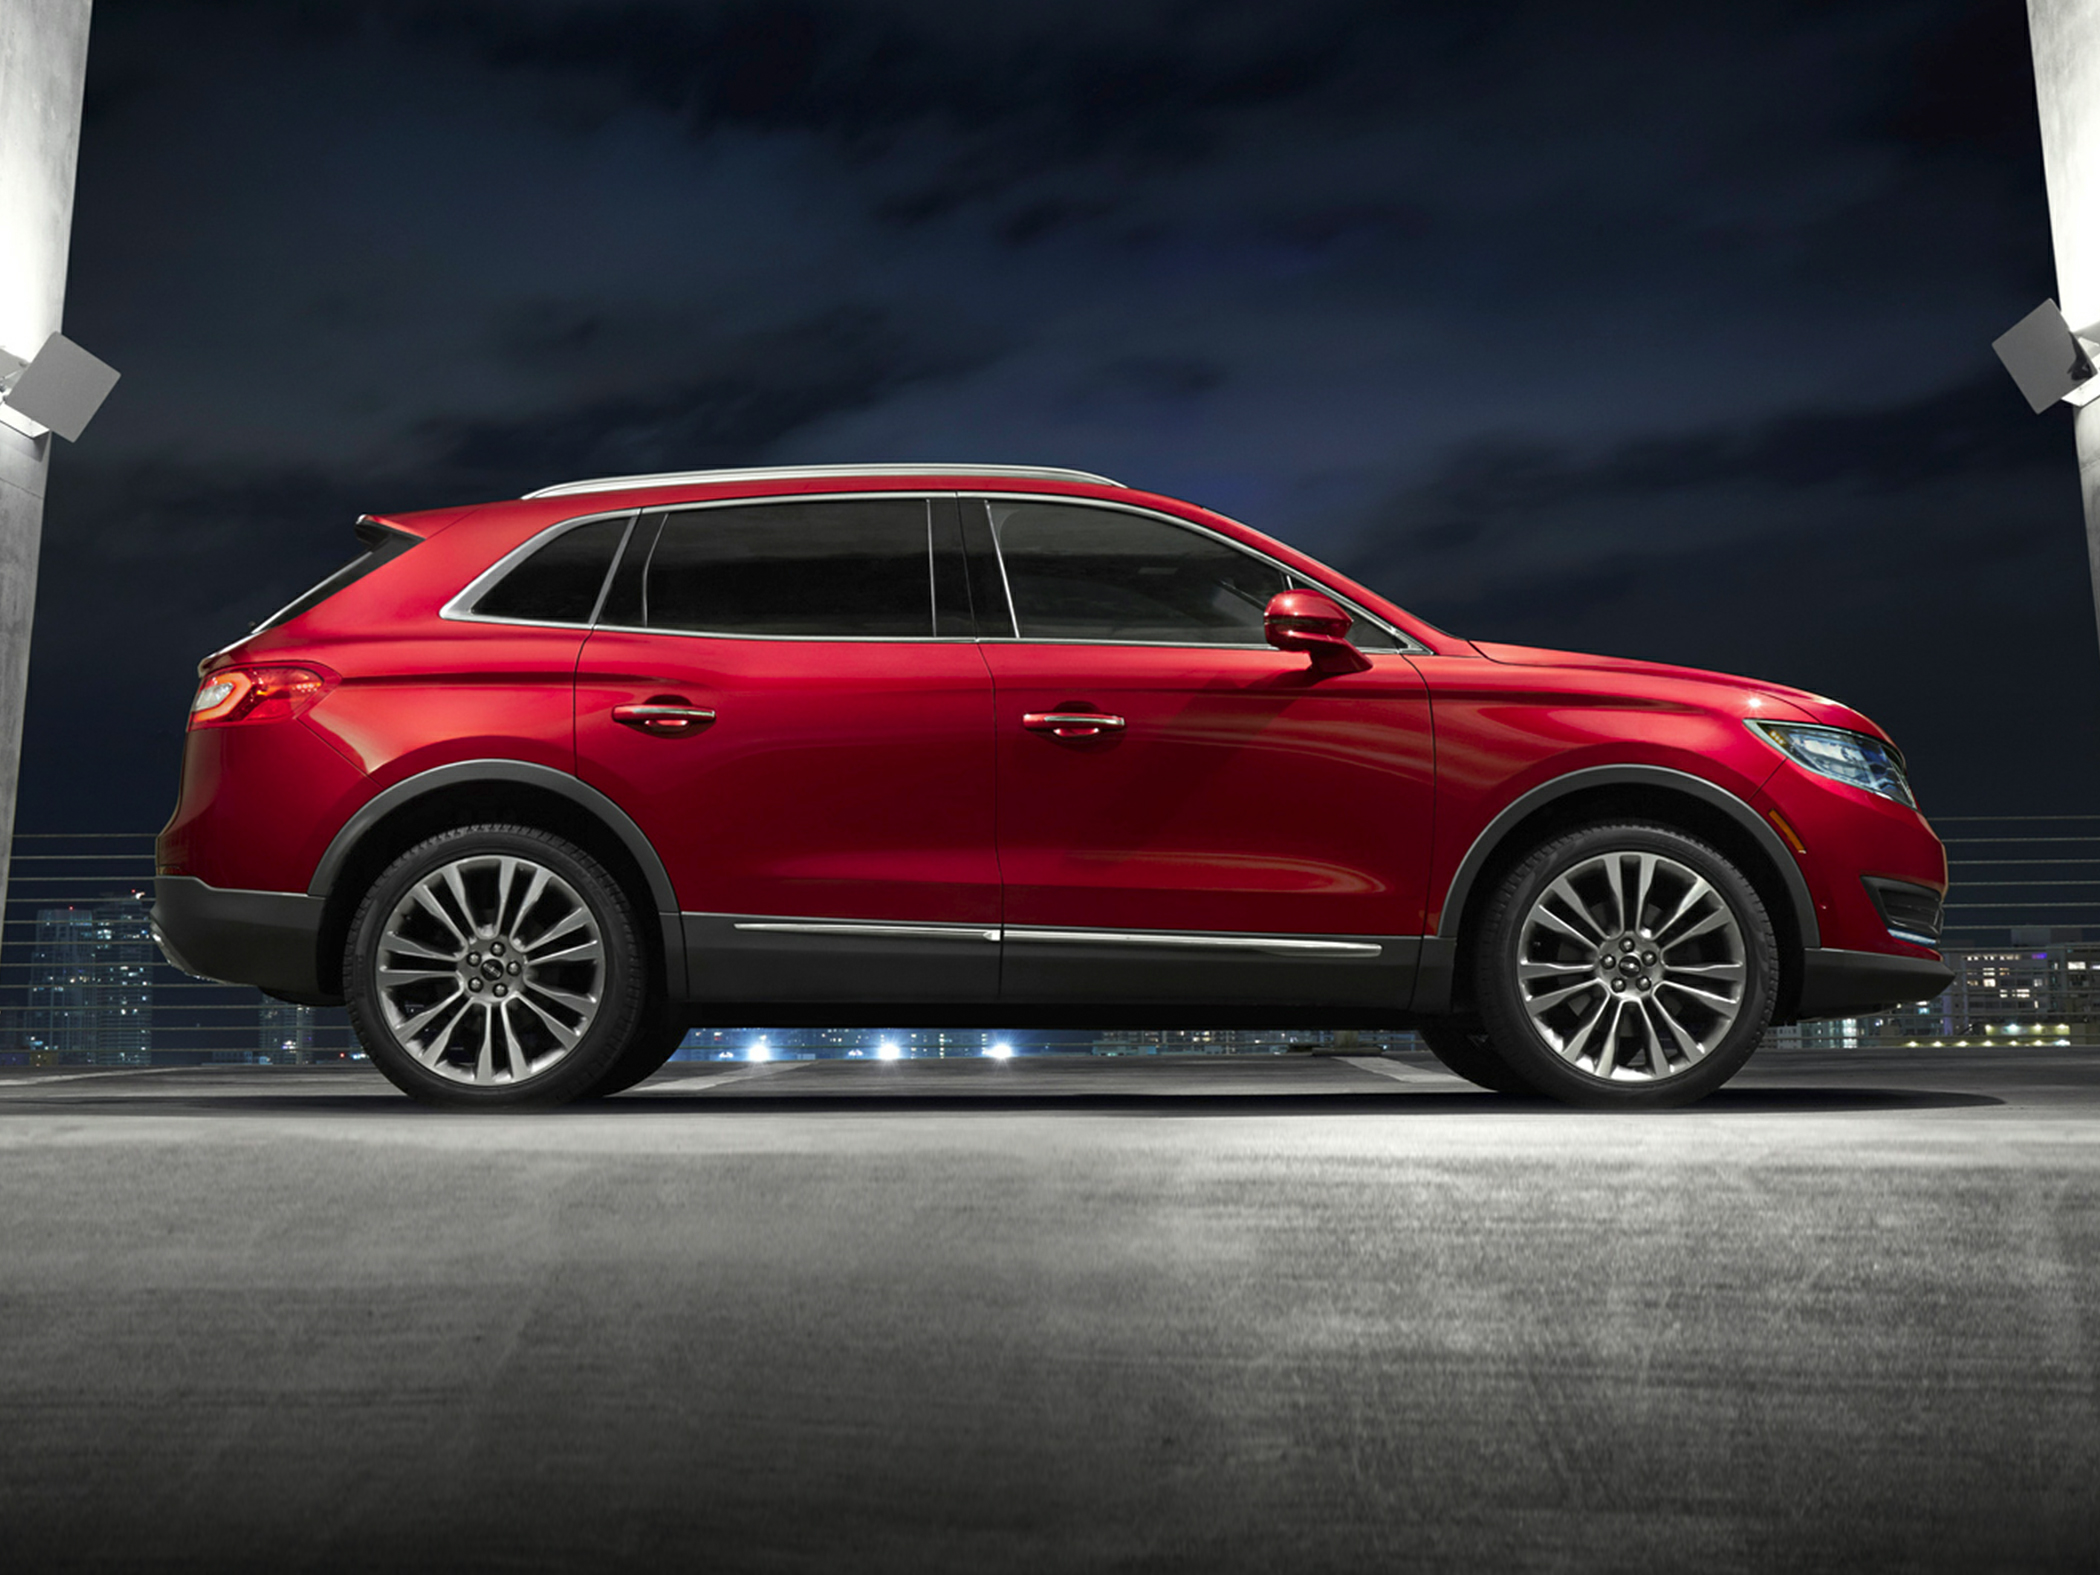 2017 Lincoln MKX